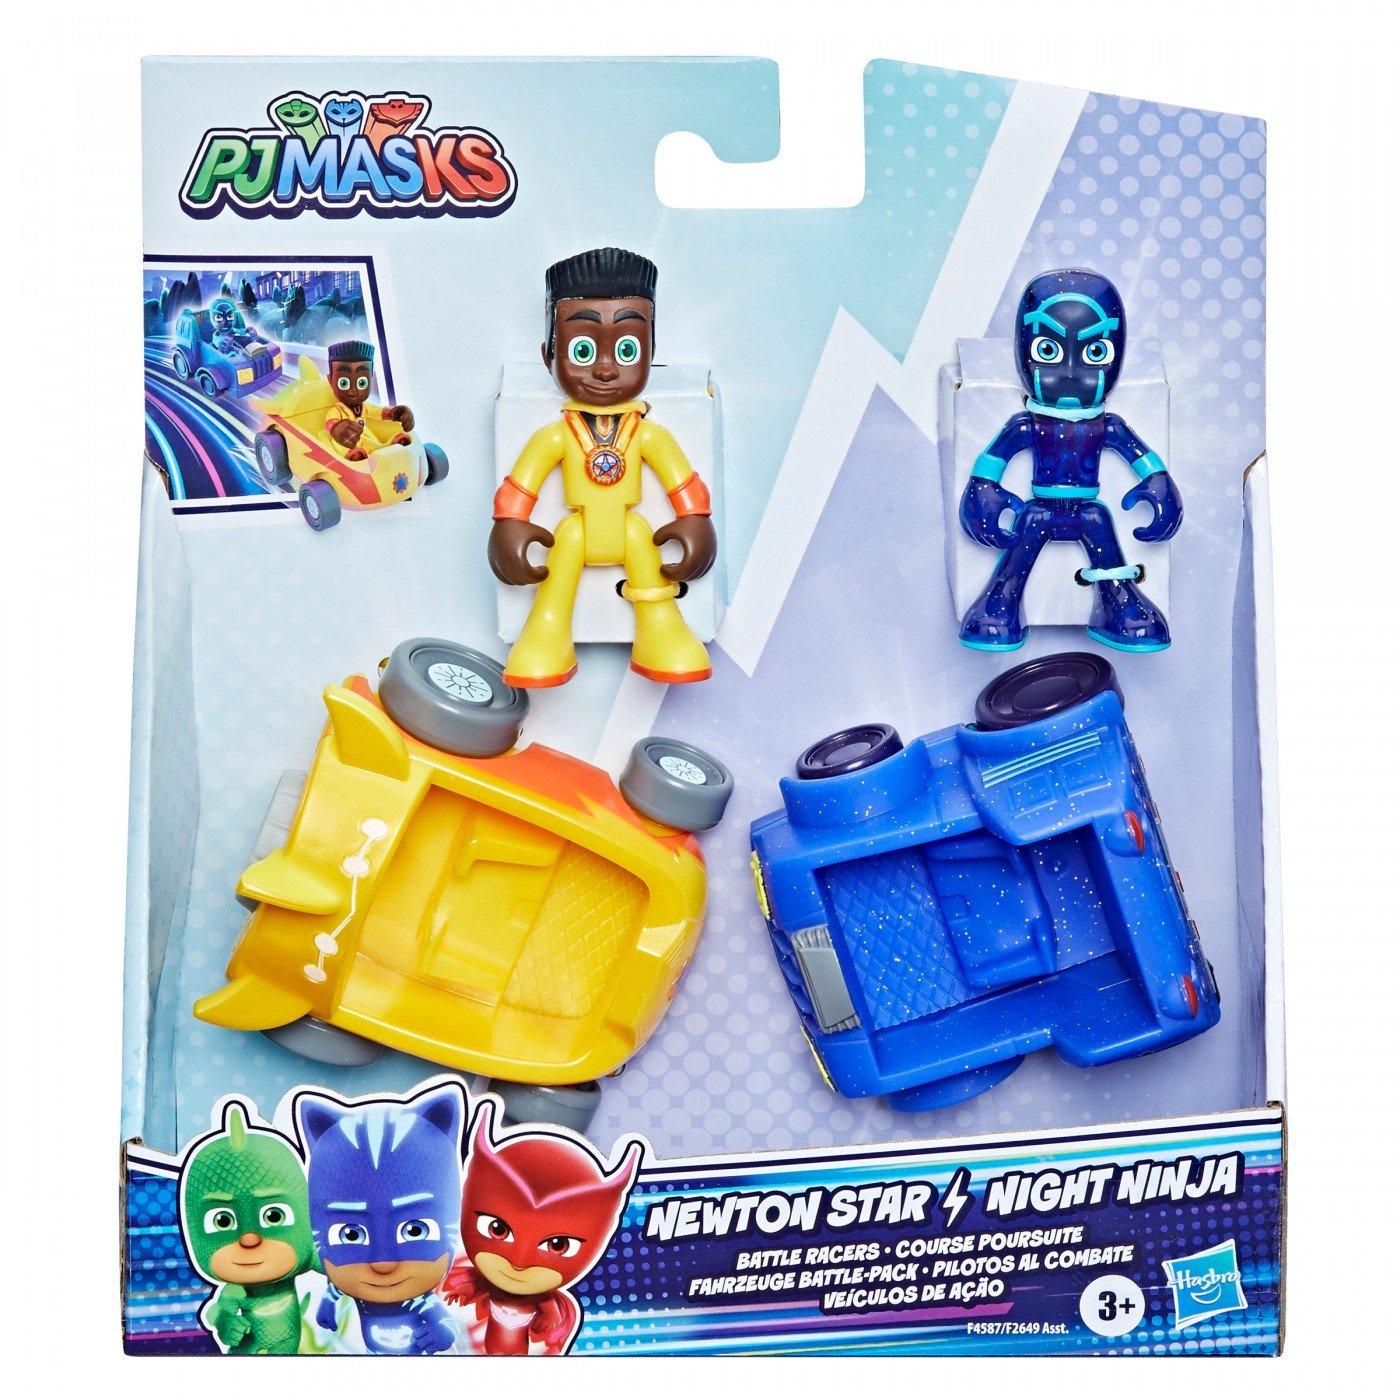 PJ Masks Pilotos Newton Vs Night Ninja Battle Racers Preschool Toy, Vehicle and Action Figure Set for Kids Ages 3 and Up - BumbleToys - 5-7 Years, Action Battling, Boys, Catboy, Funday, Pirate Power, Pj Masks